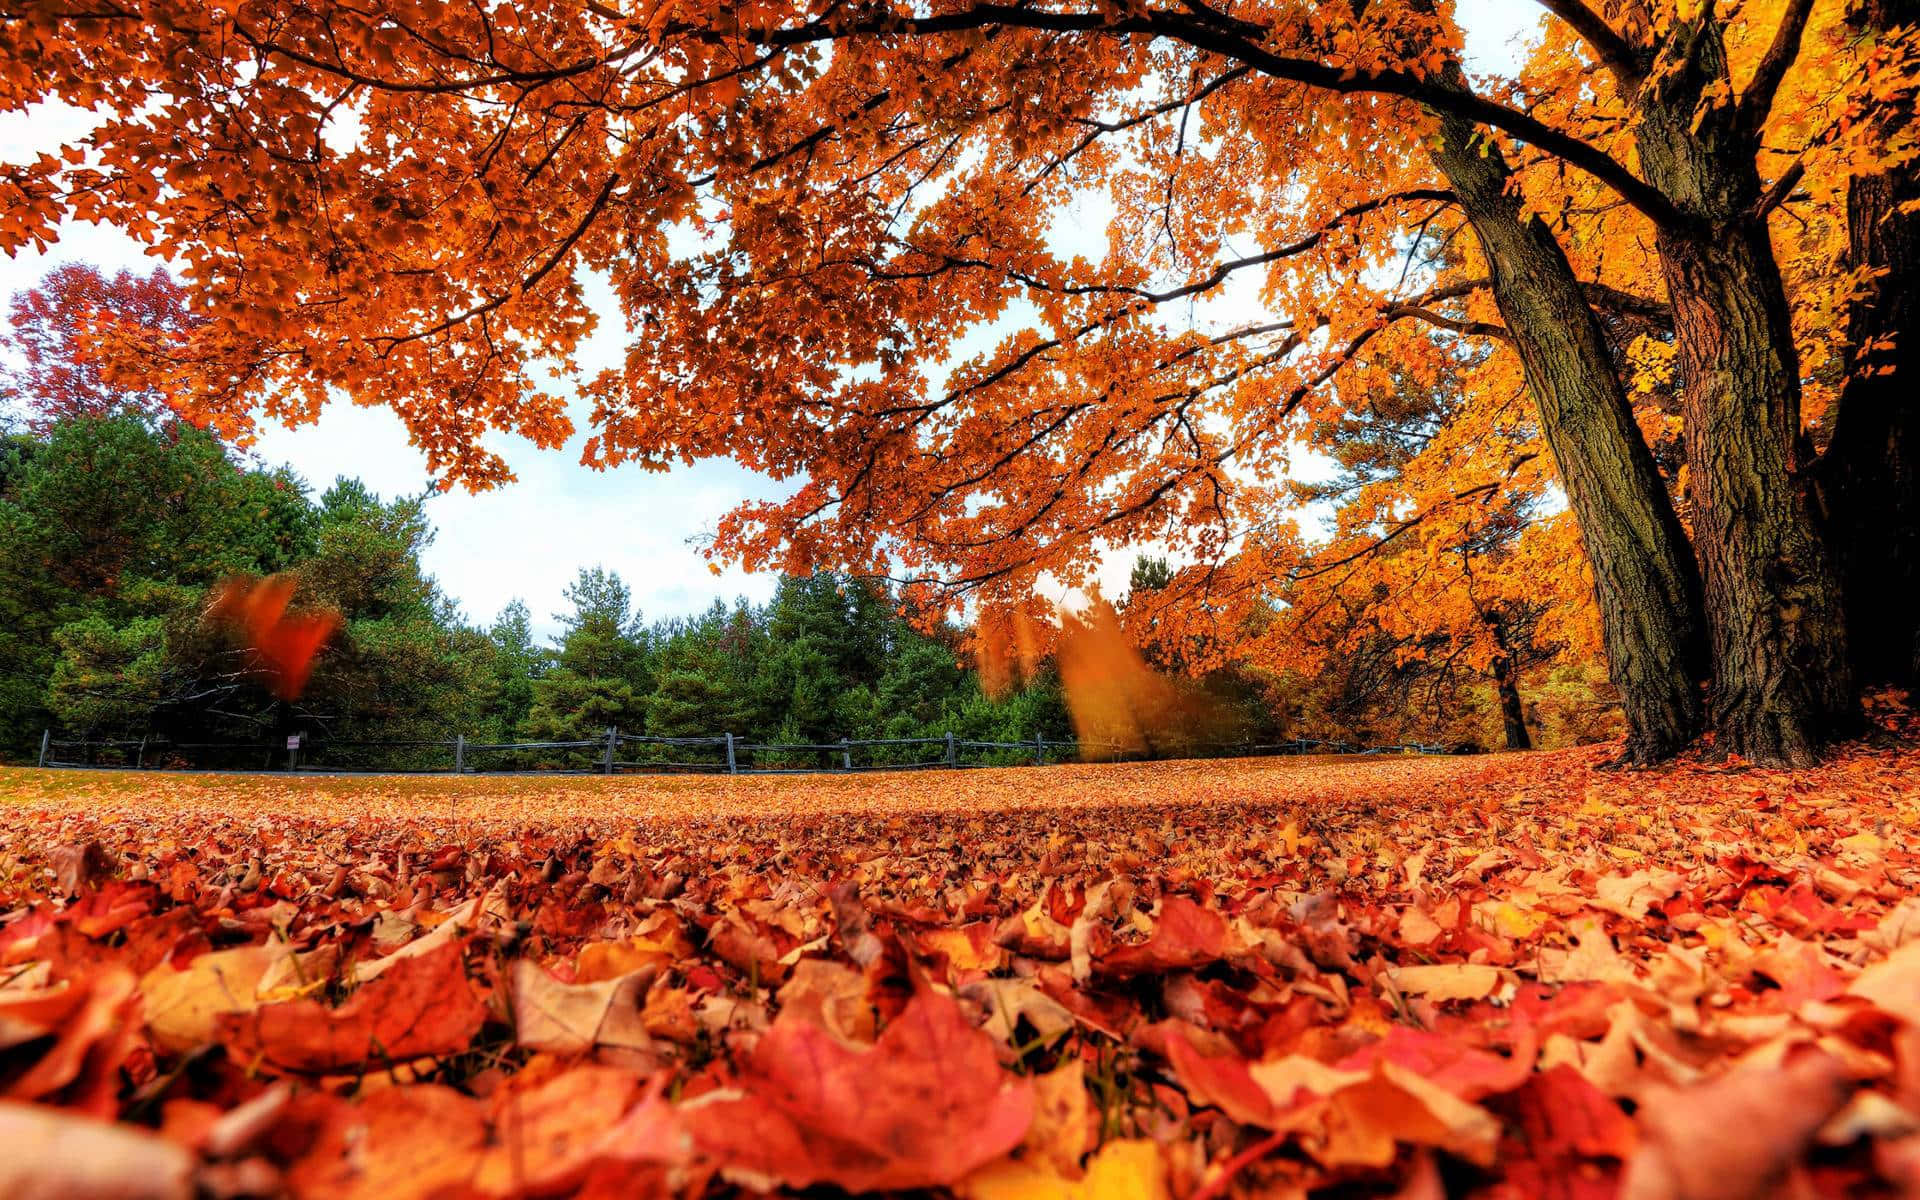 Enjoy a peaceful day amongst the fall leaves